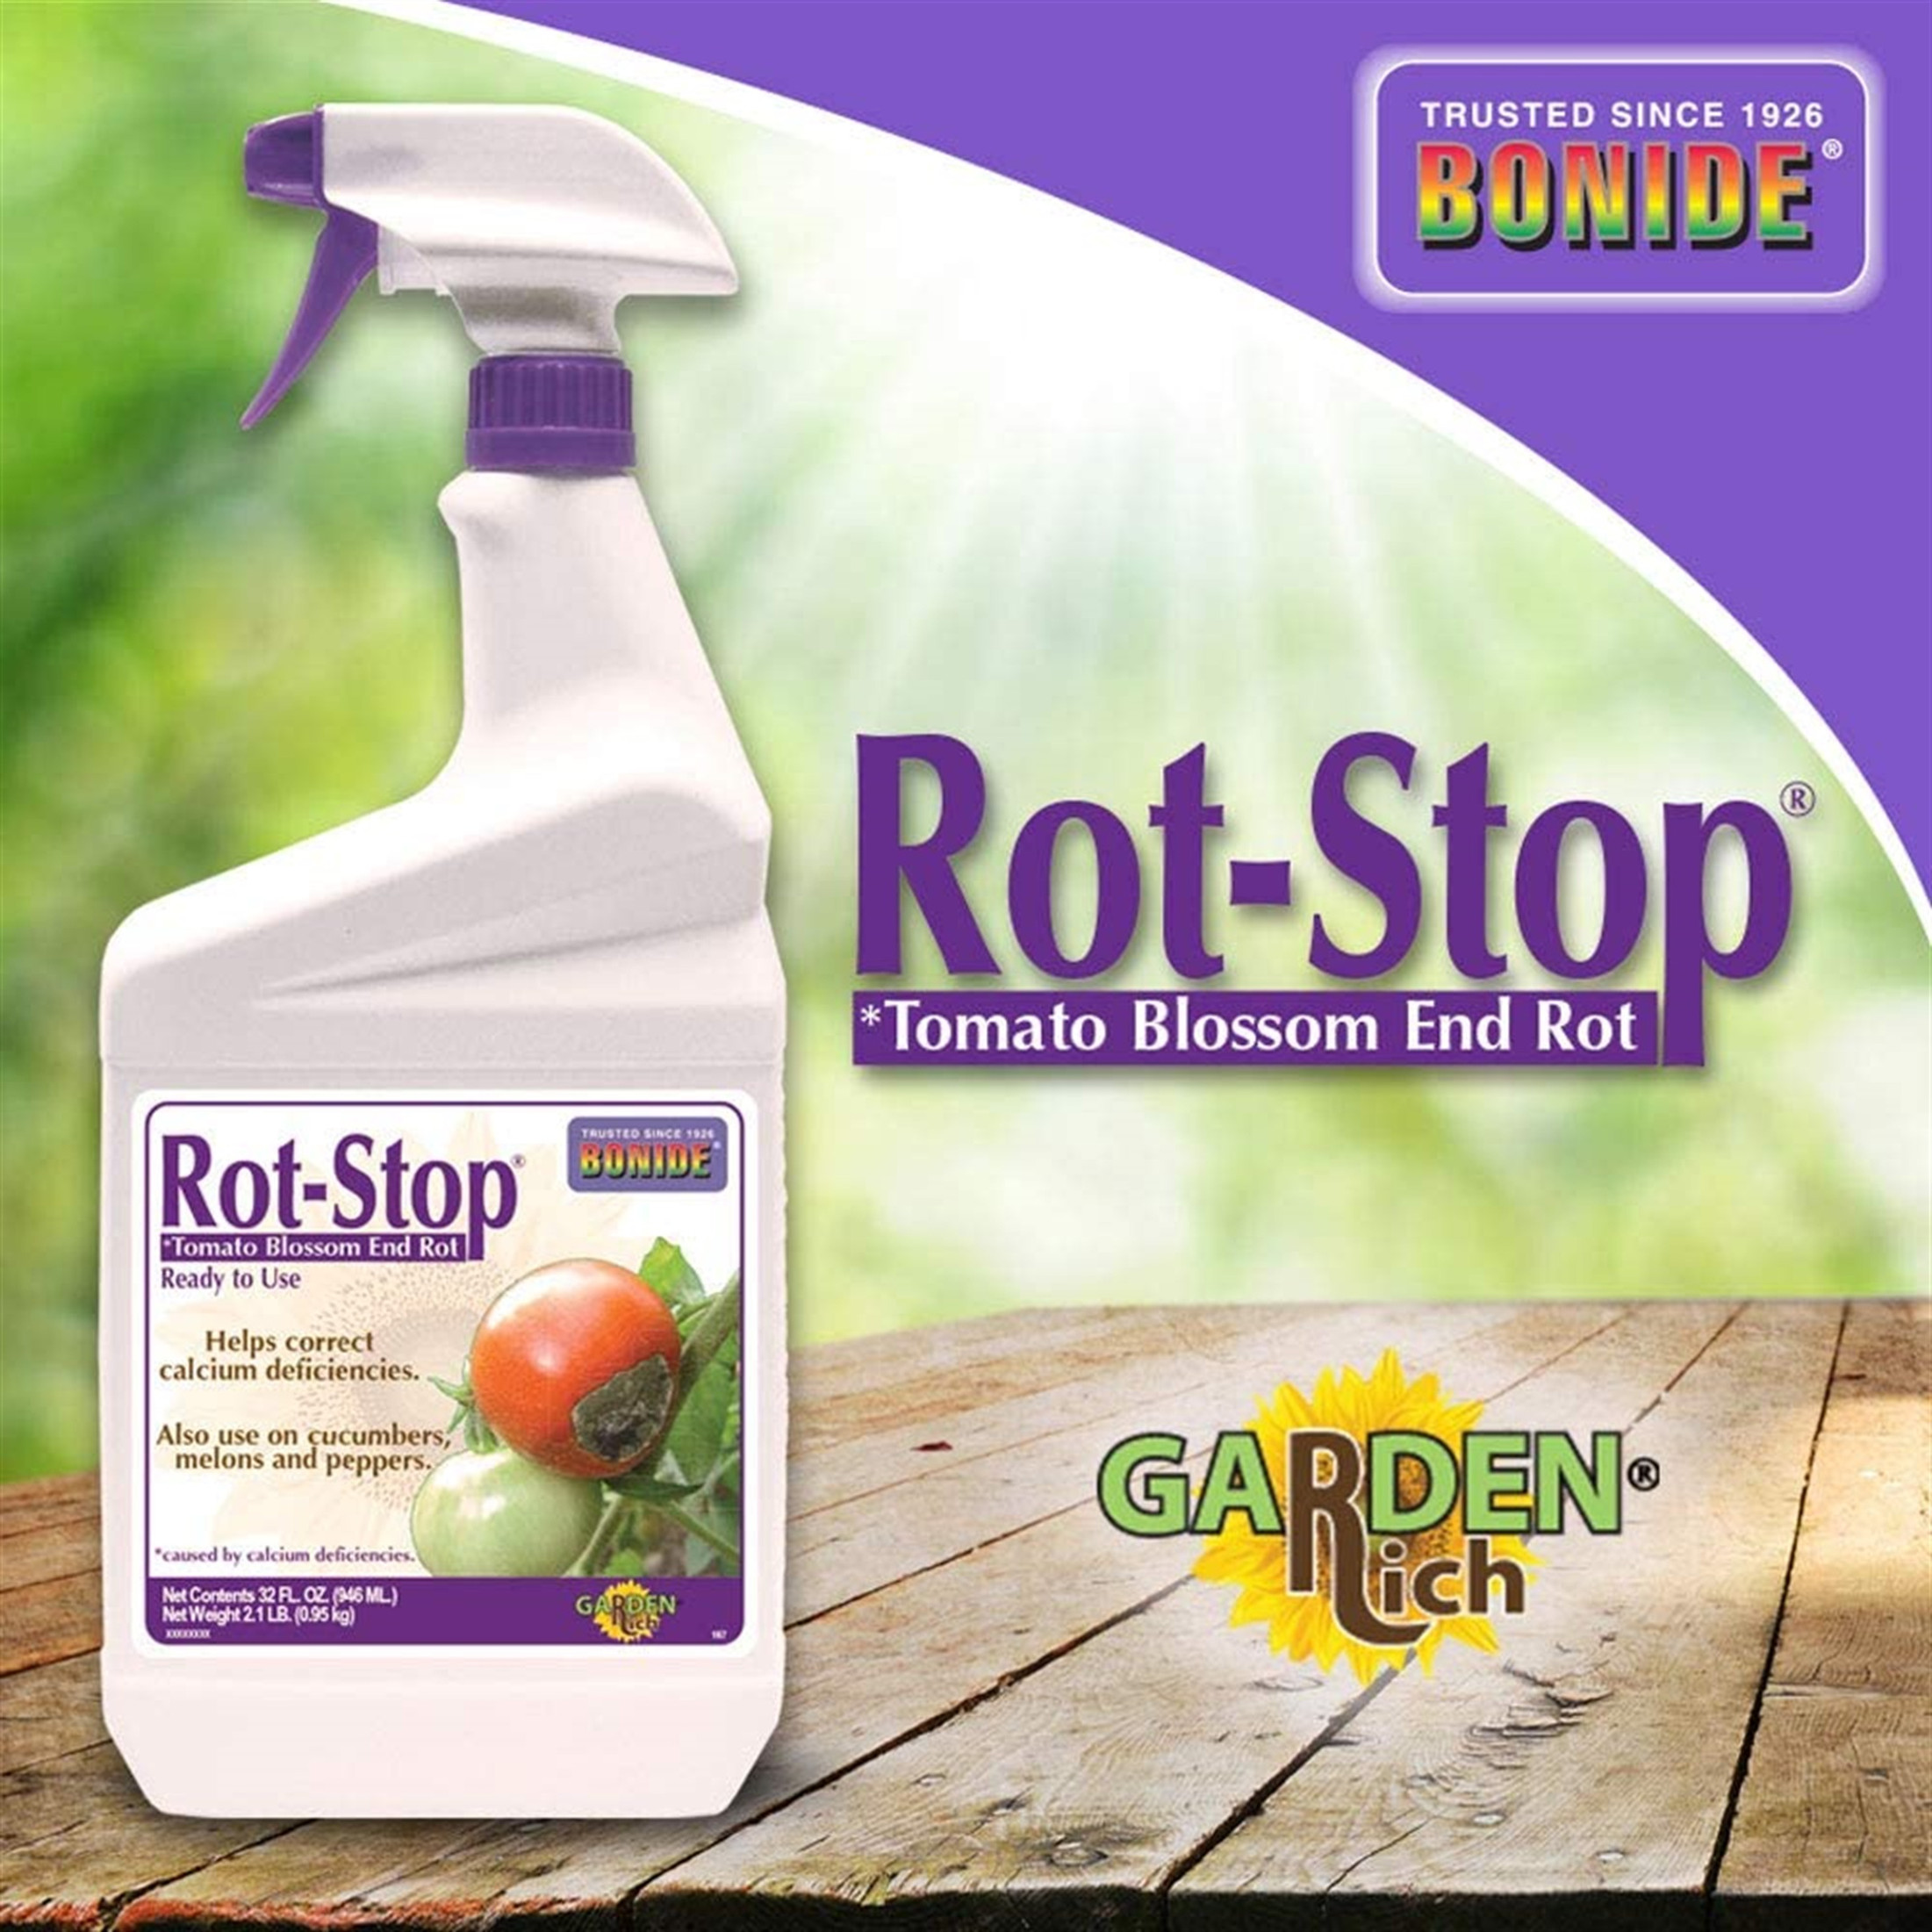 Bonide Rot-Stop Tomato Blossom End Rot, Ready to Use, 32 oz